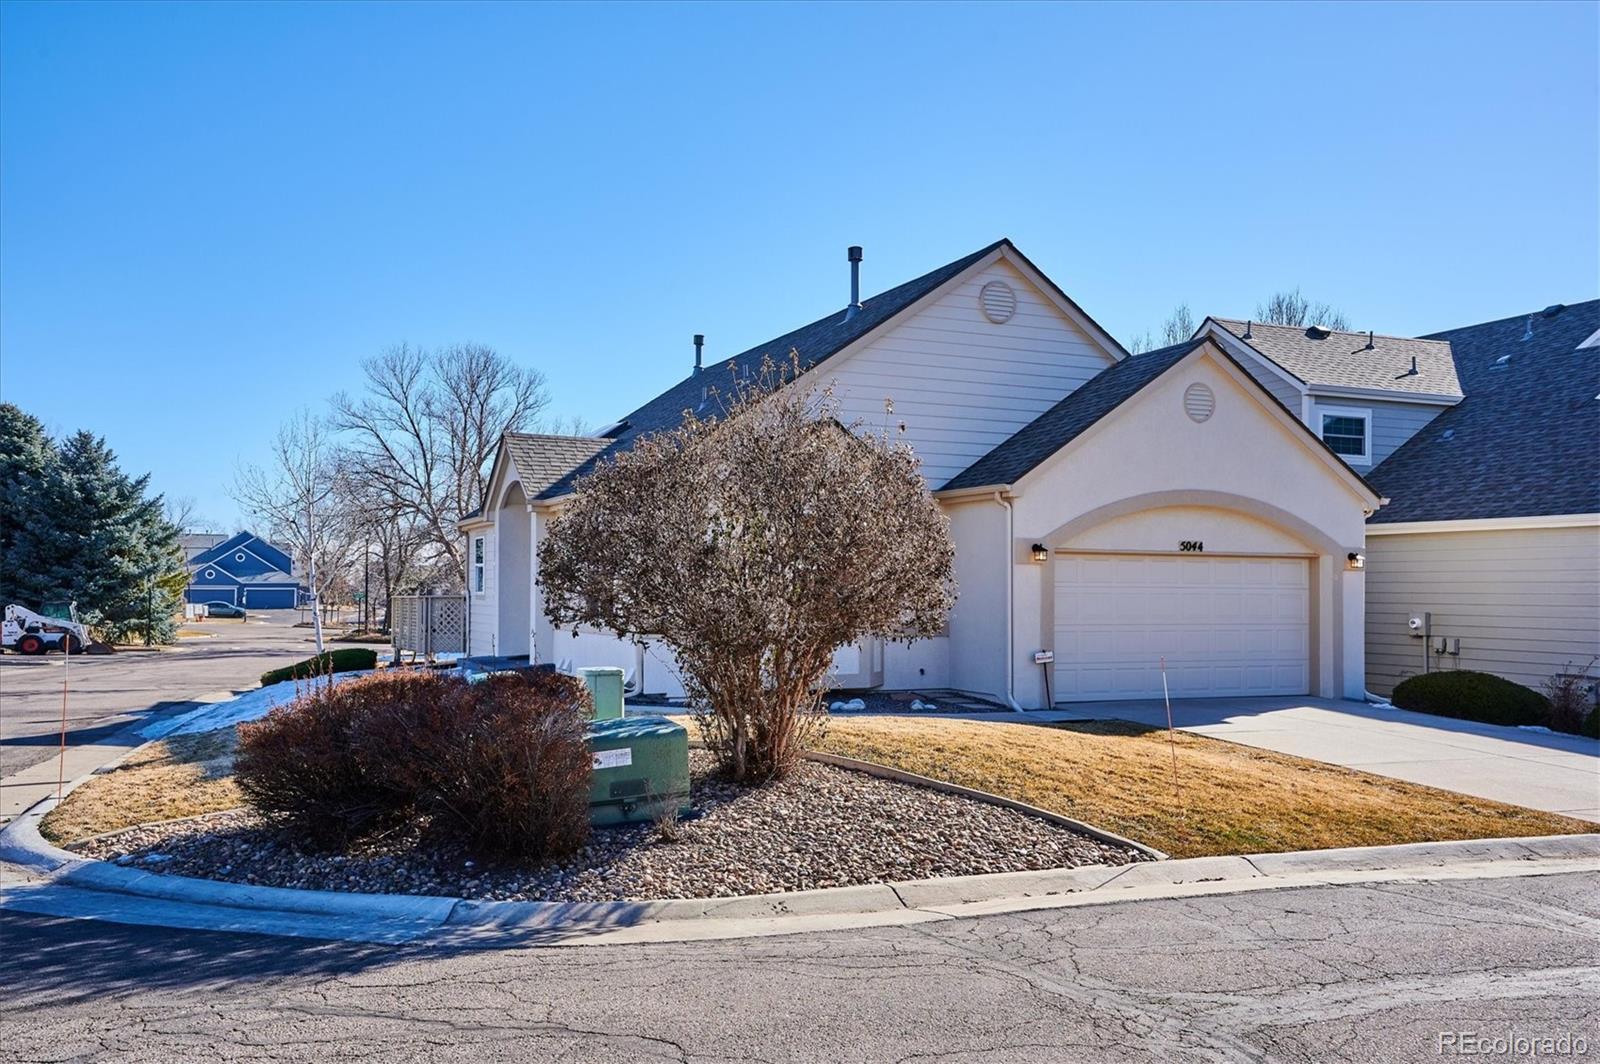 Report Image for 5044 S Newcombe Court,Littleton, Colorado